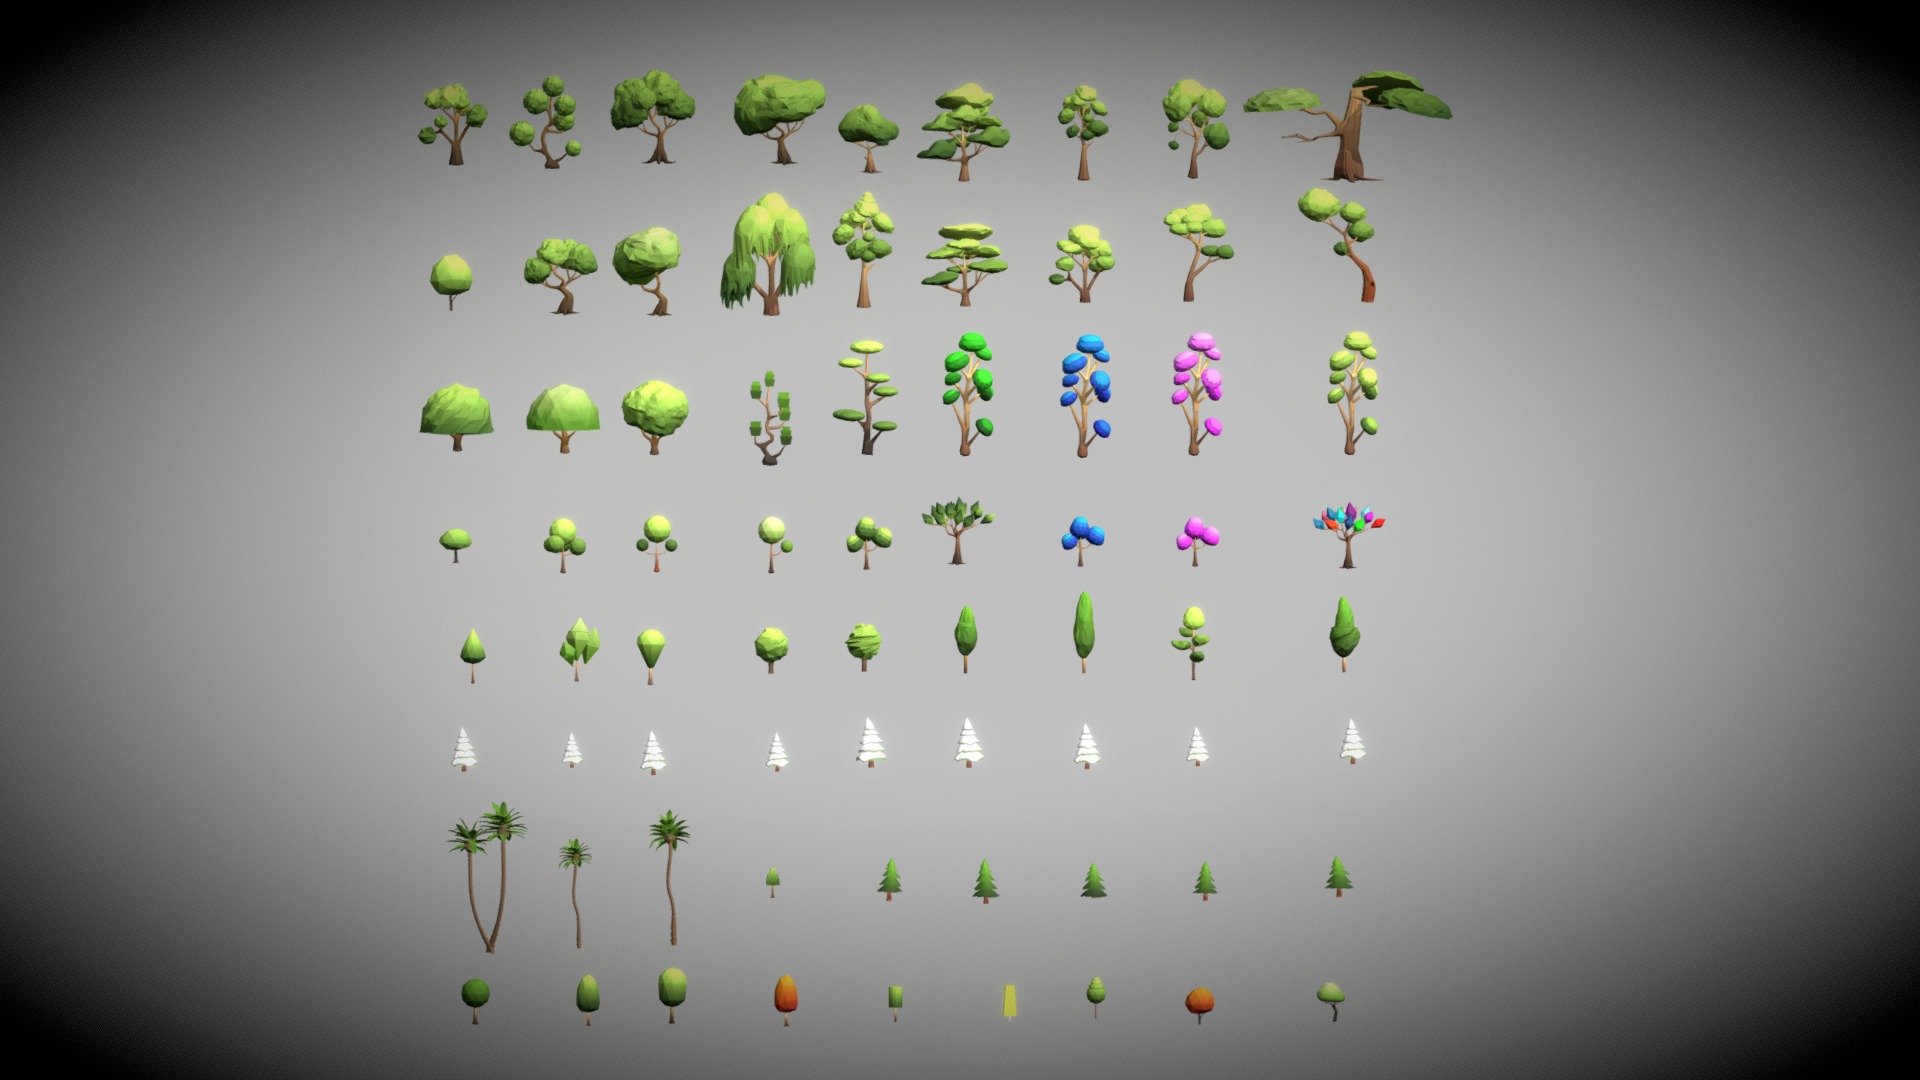 The &ldquo;Tree Low Poly Pack